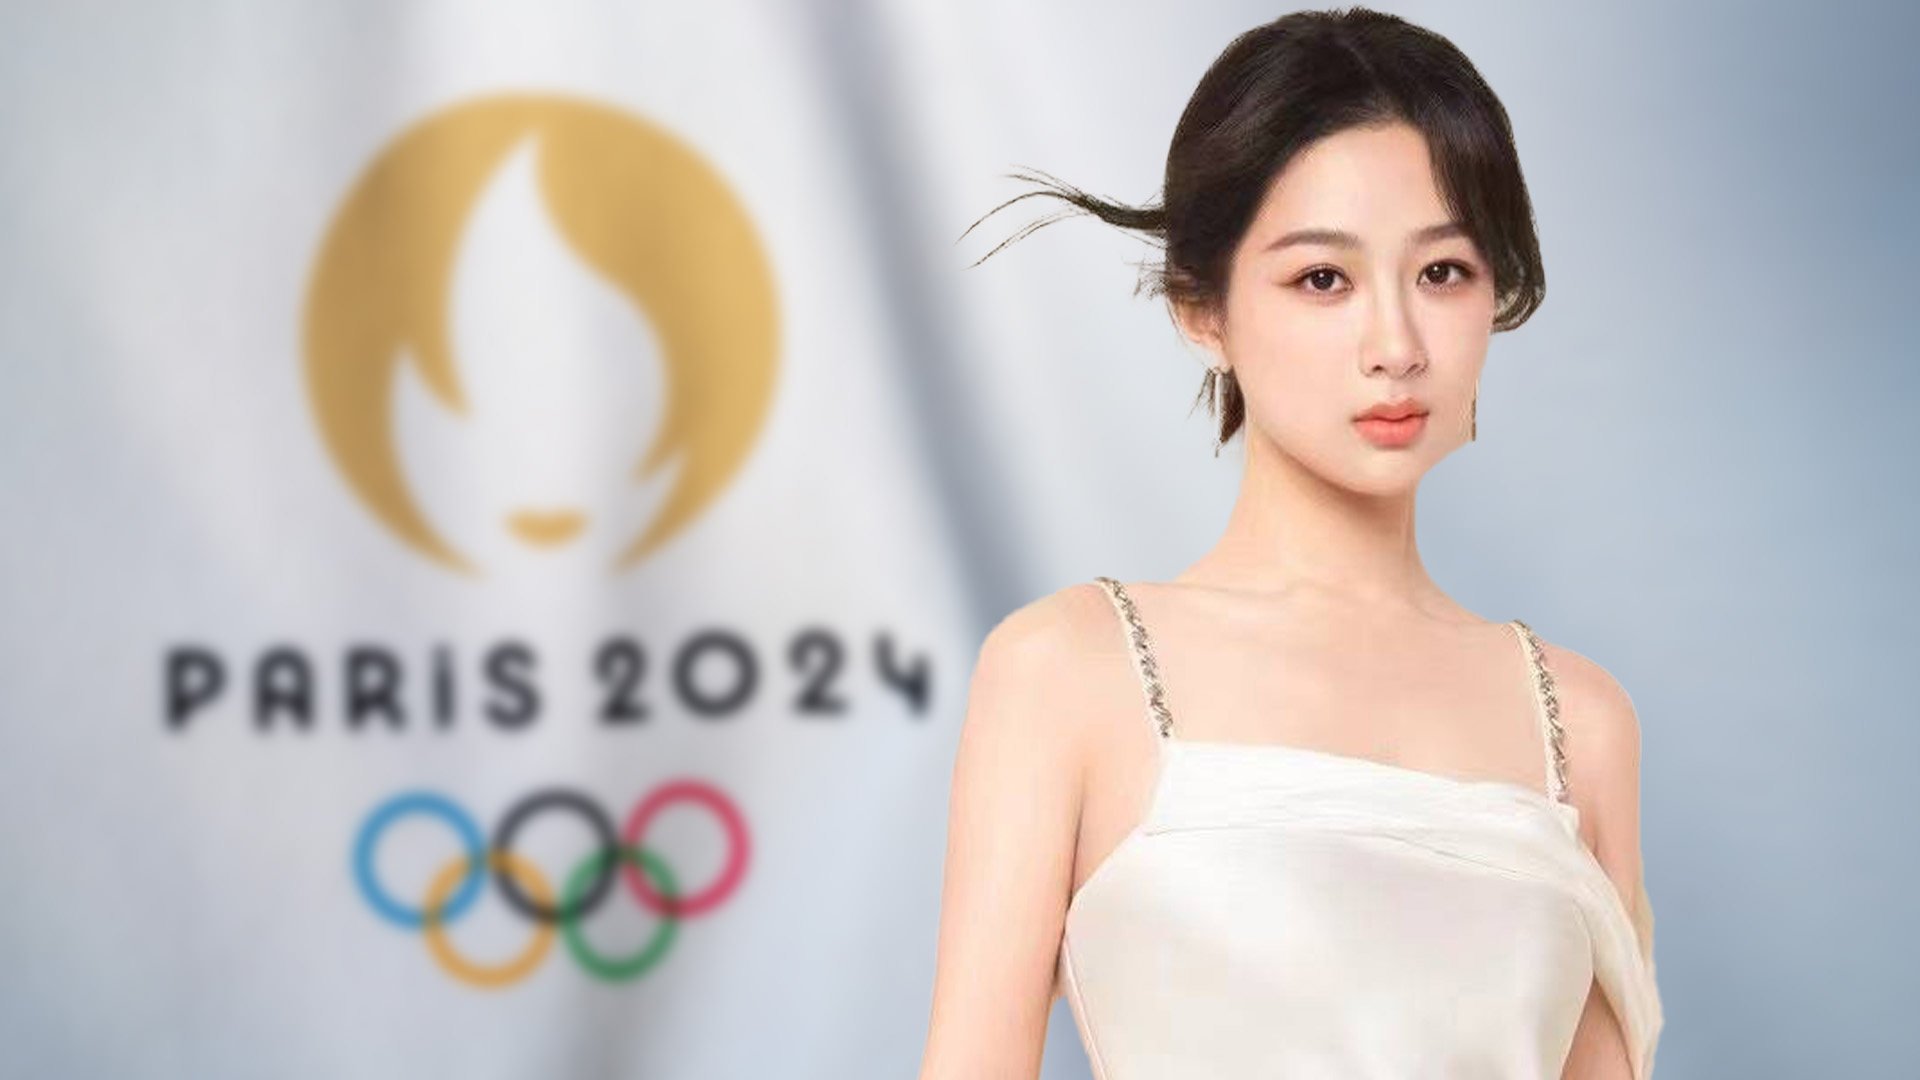 Chinese actress Yang Zi has been selected as torch-bearer for the 2024 Paris Olympics, delighting her growing global fanbase. Photo: SCMP composite/Shutterstock/Weibo
